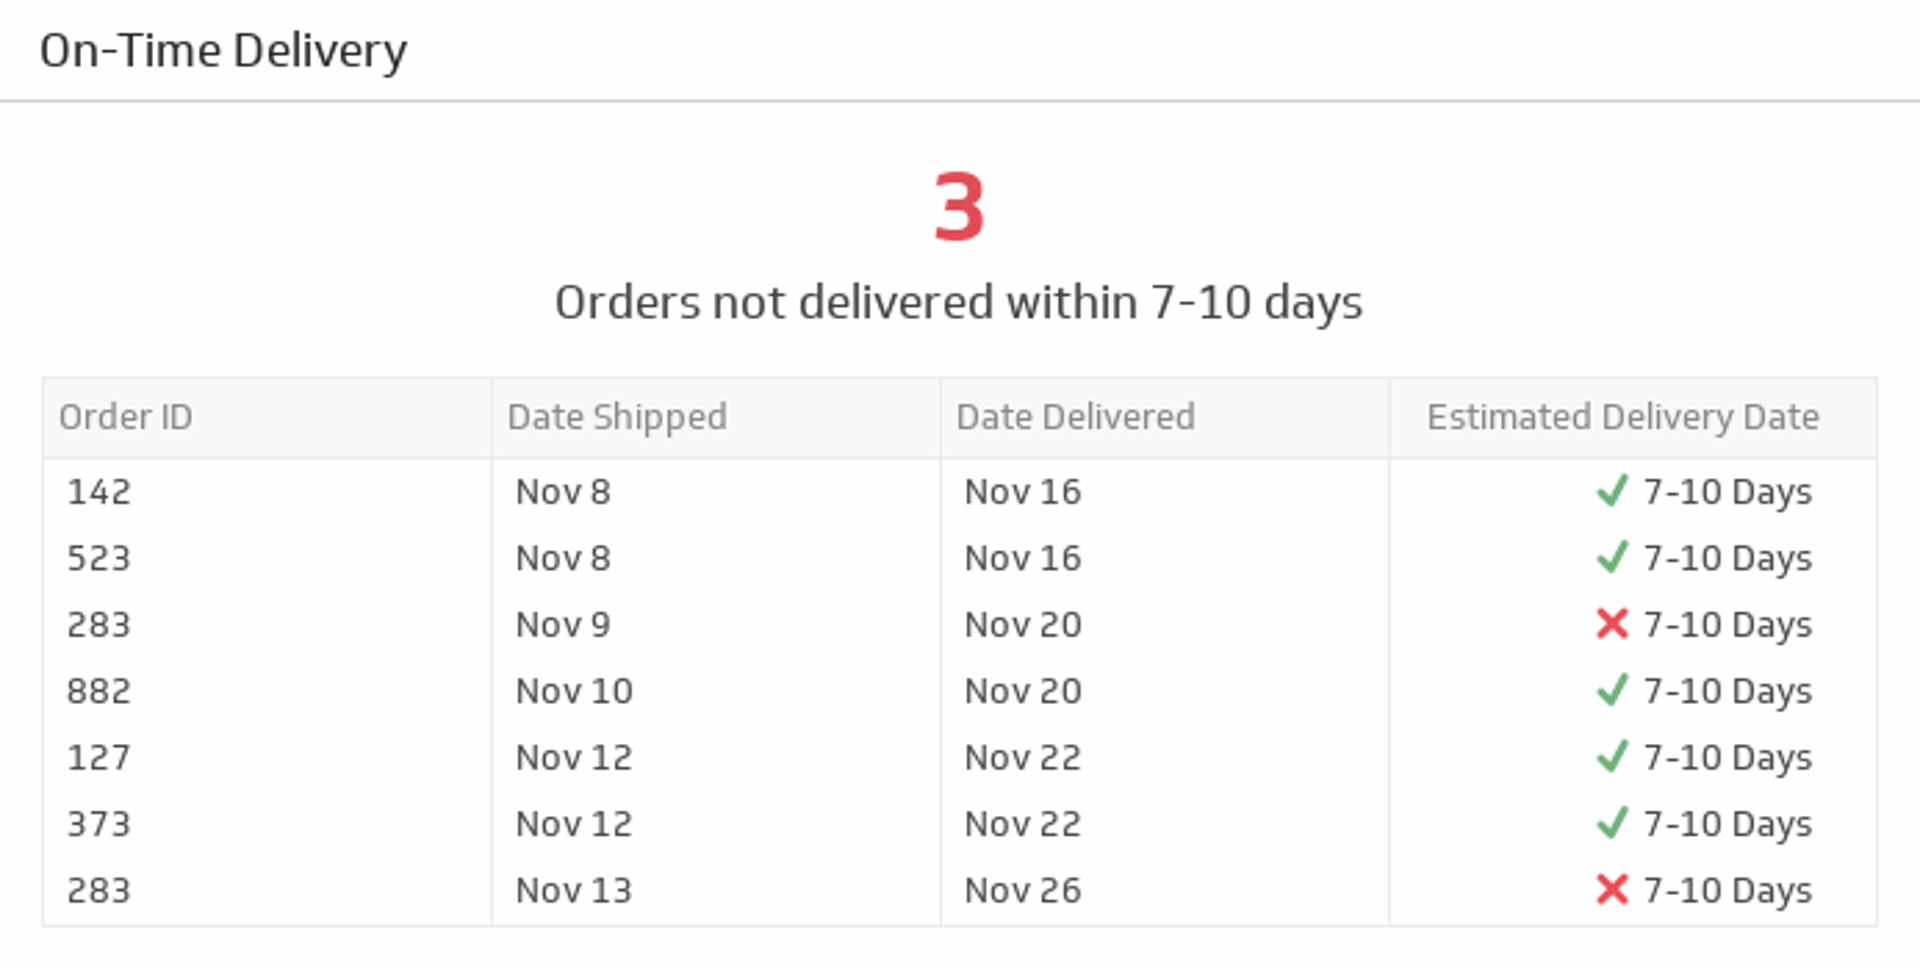 Ecommerce KPI Example - On-Time Delivery Metric